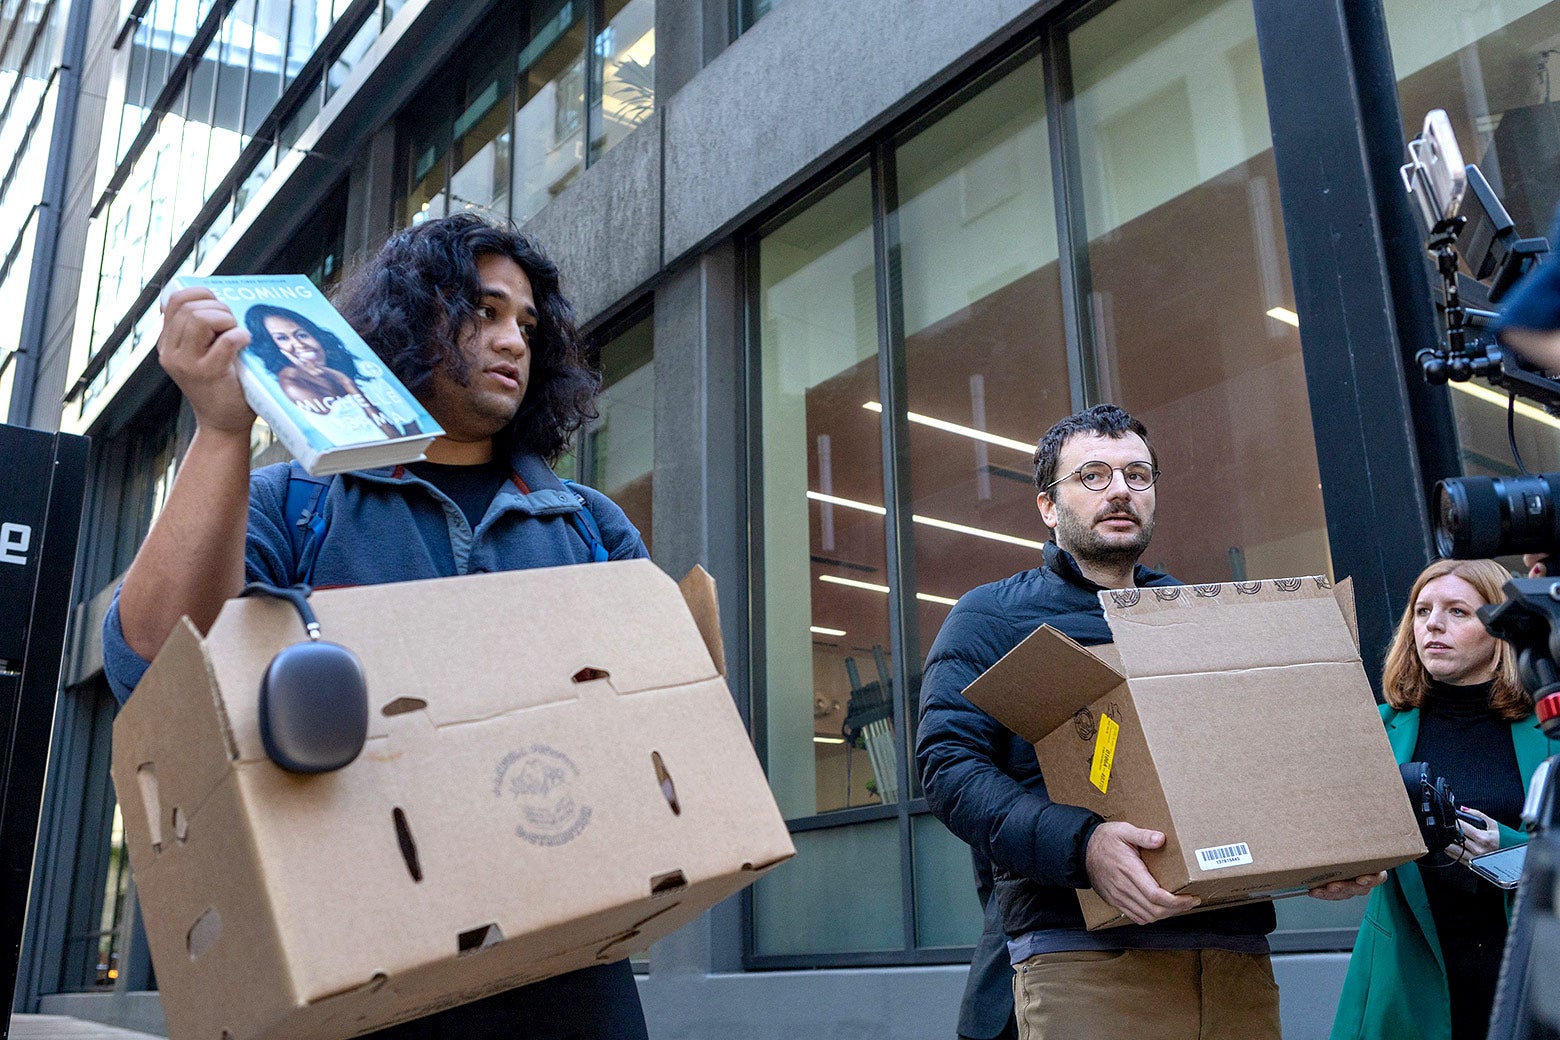 The two pranksters—"Ligma and Johnson"—who claimed to be laid-off Twitter workers. They are walking outside of the company's building in San Francisco carrying boxes off possessions.